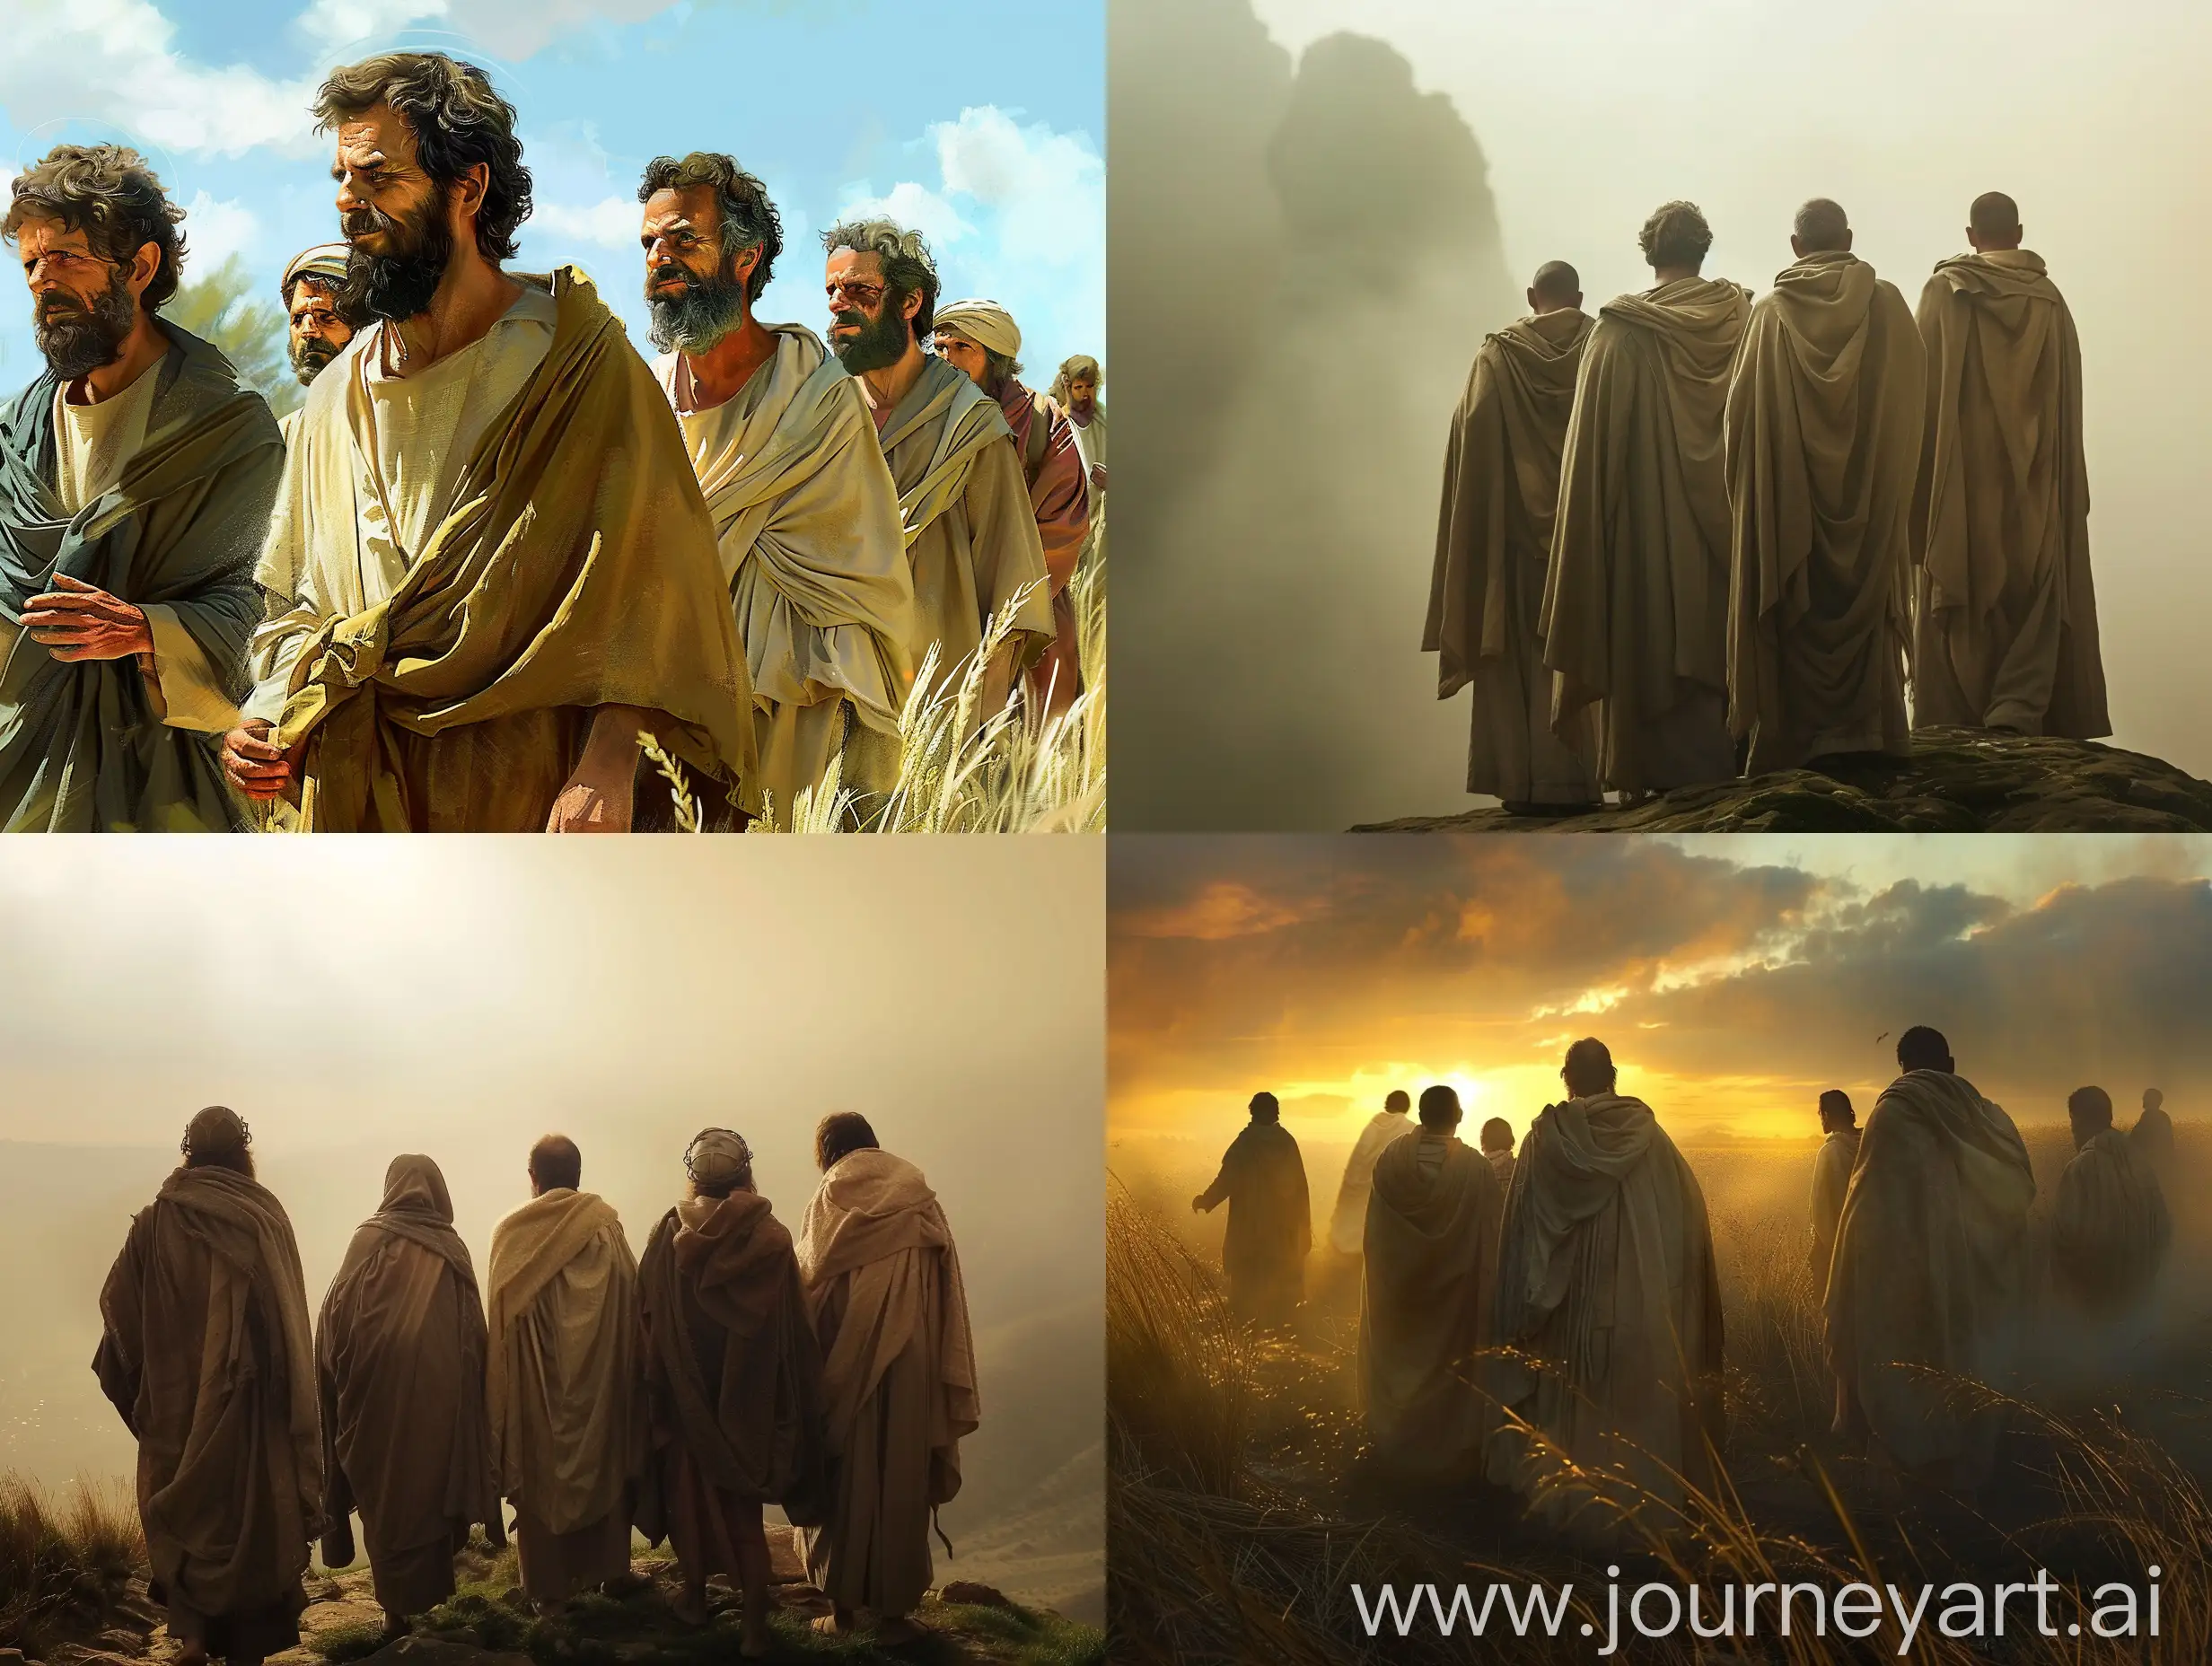 Have you ever wondered how the apostles of Jesus, those who walked by His side and spread His teachings across the globe, met their ends?